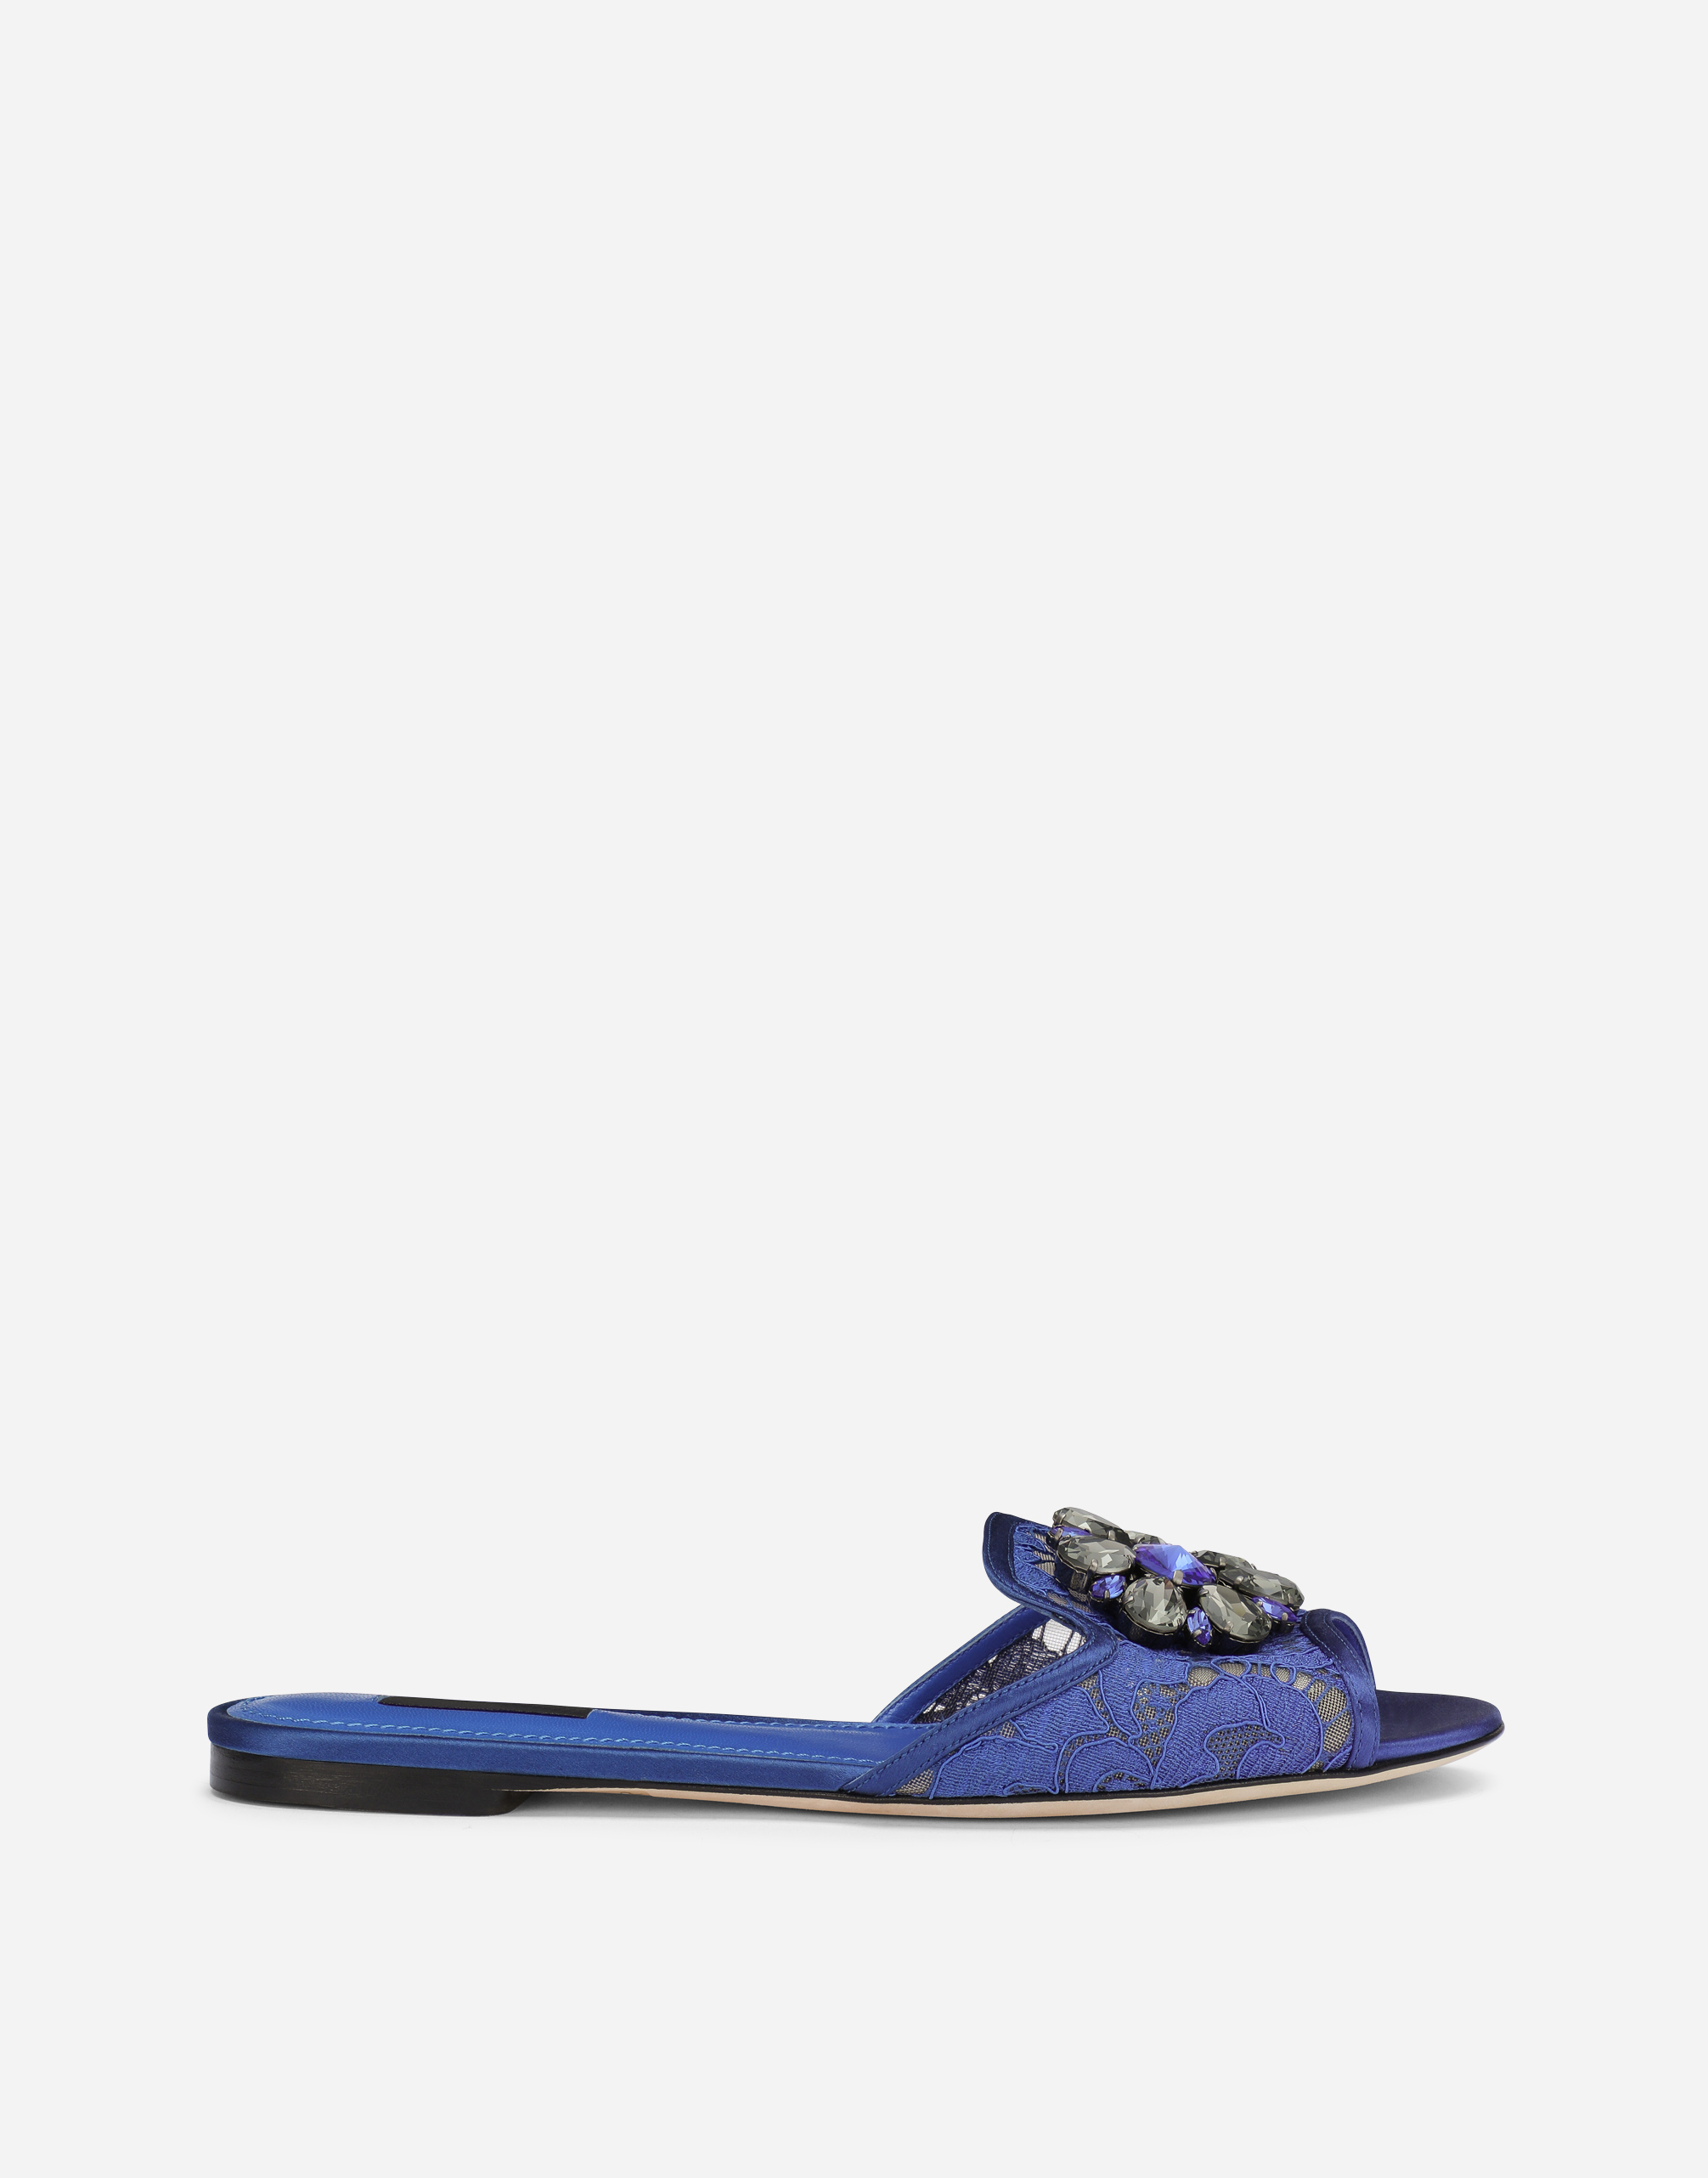 Lace rainbow slides with brooch detailing in Blue